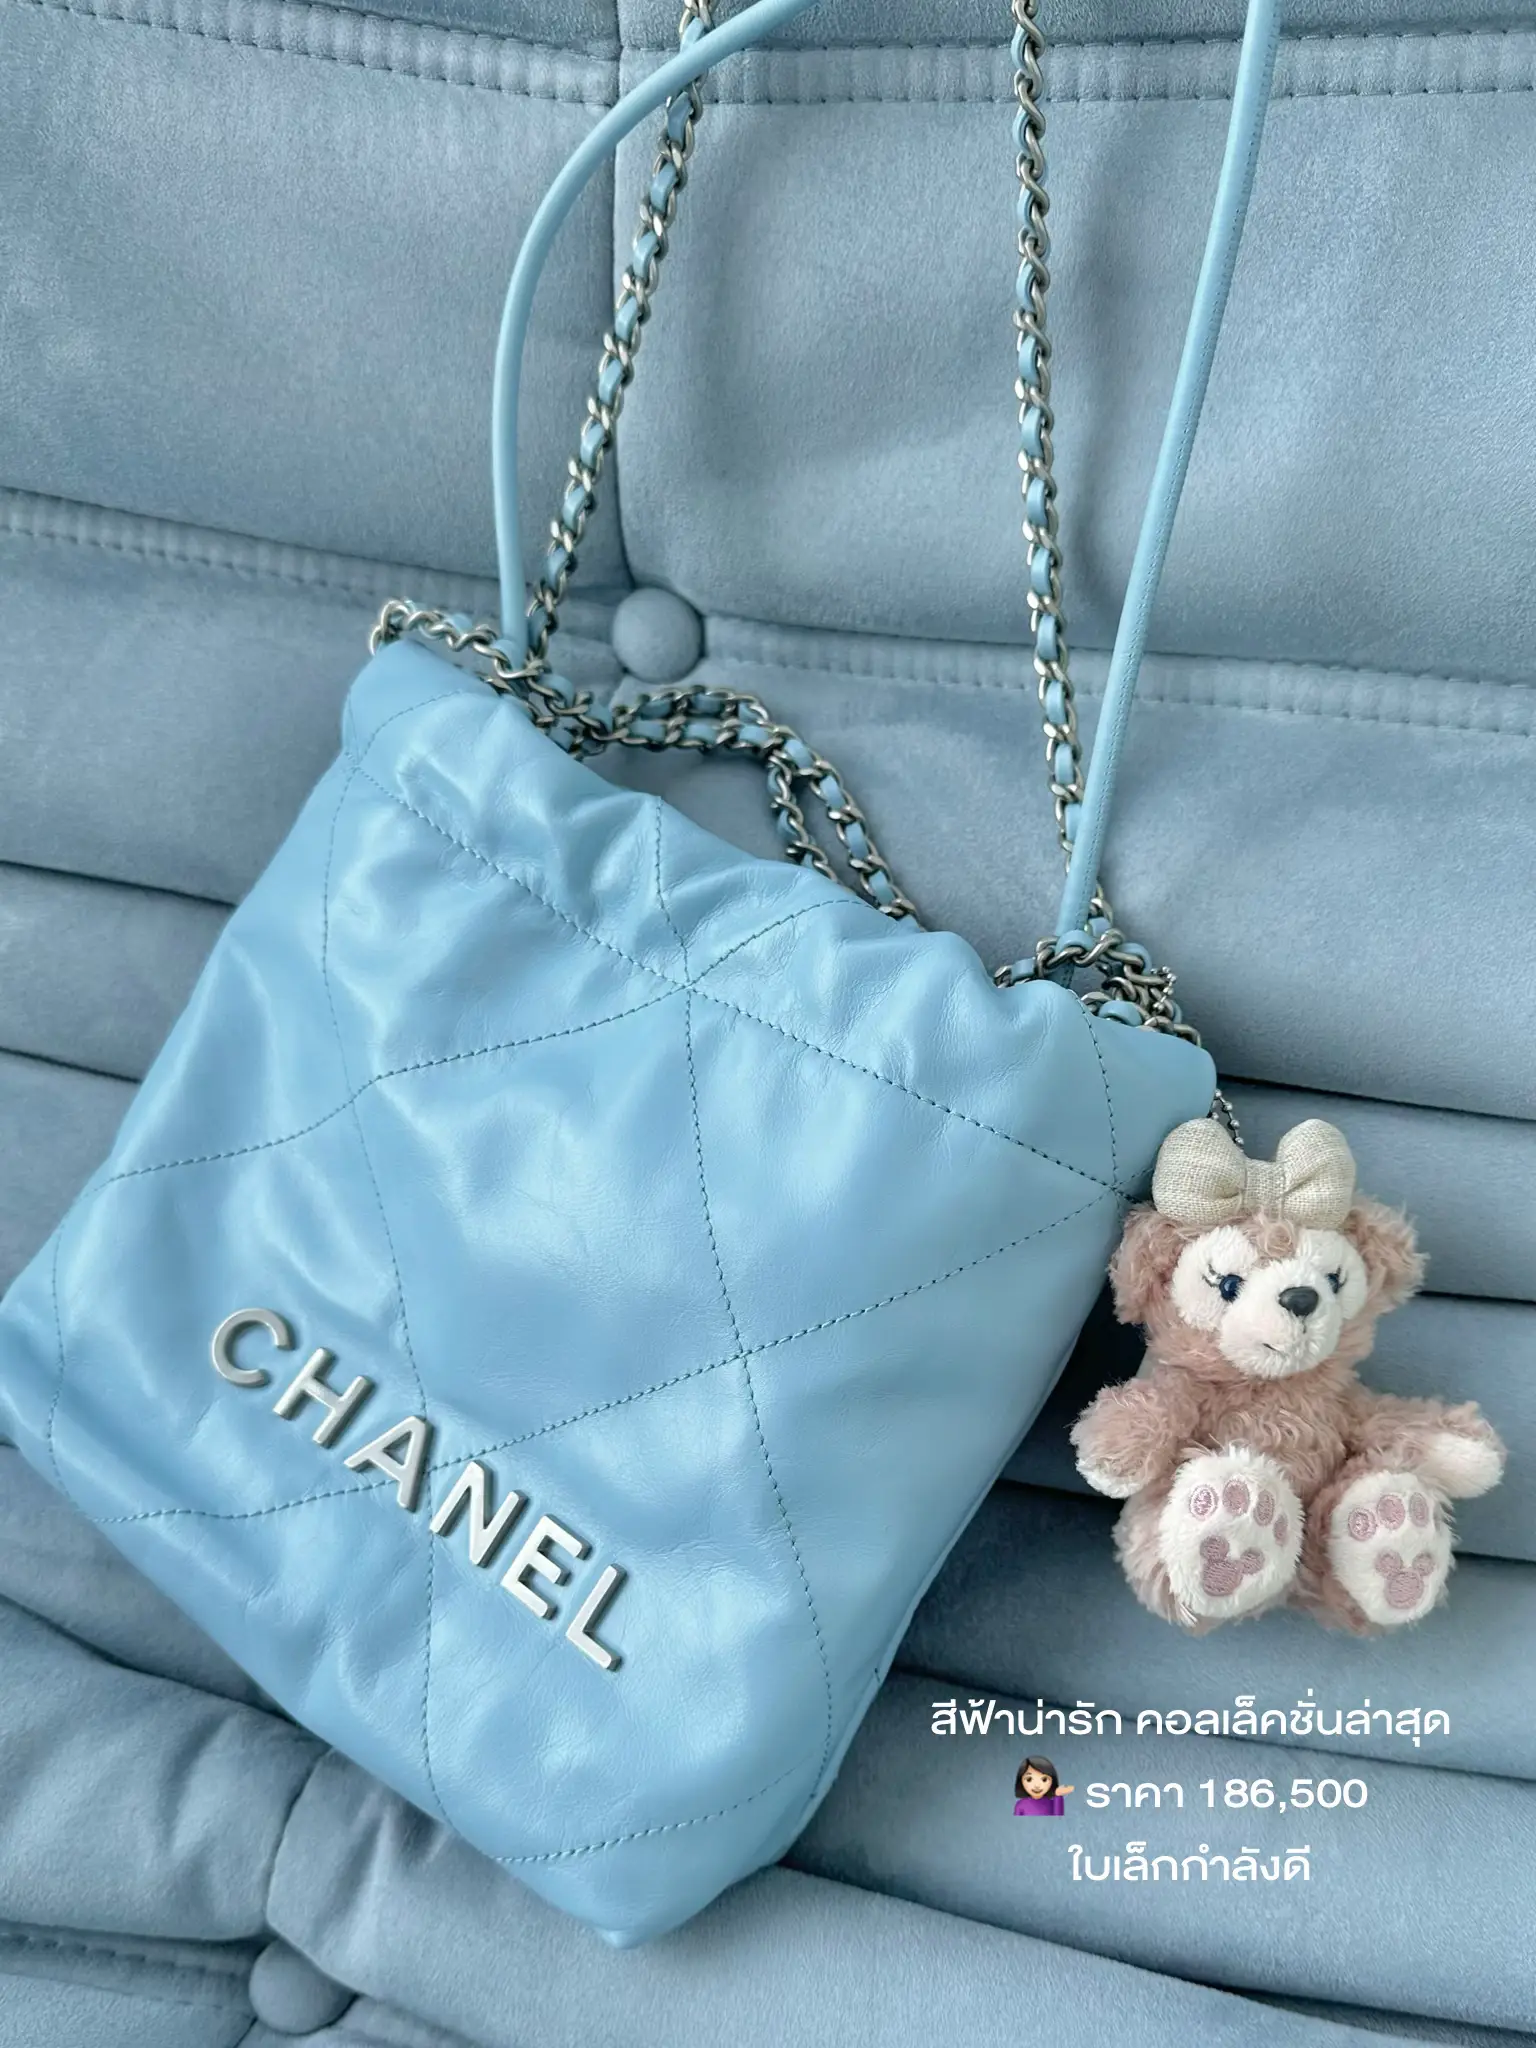 CHANEL 22 MINI HANDBAG REVIEW  Gallery posted by Avianna Astrid